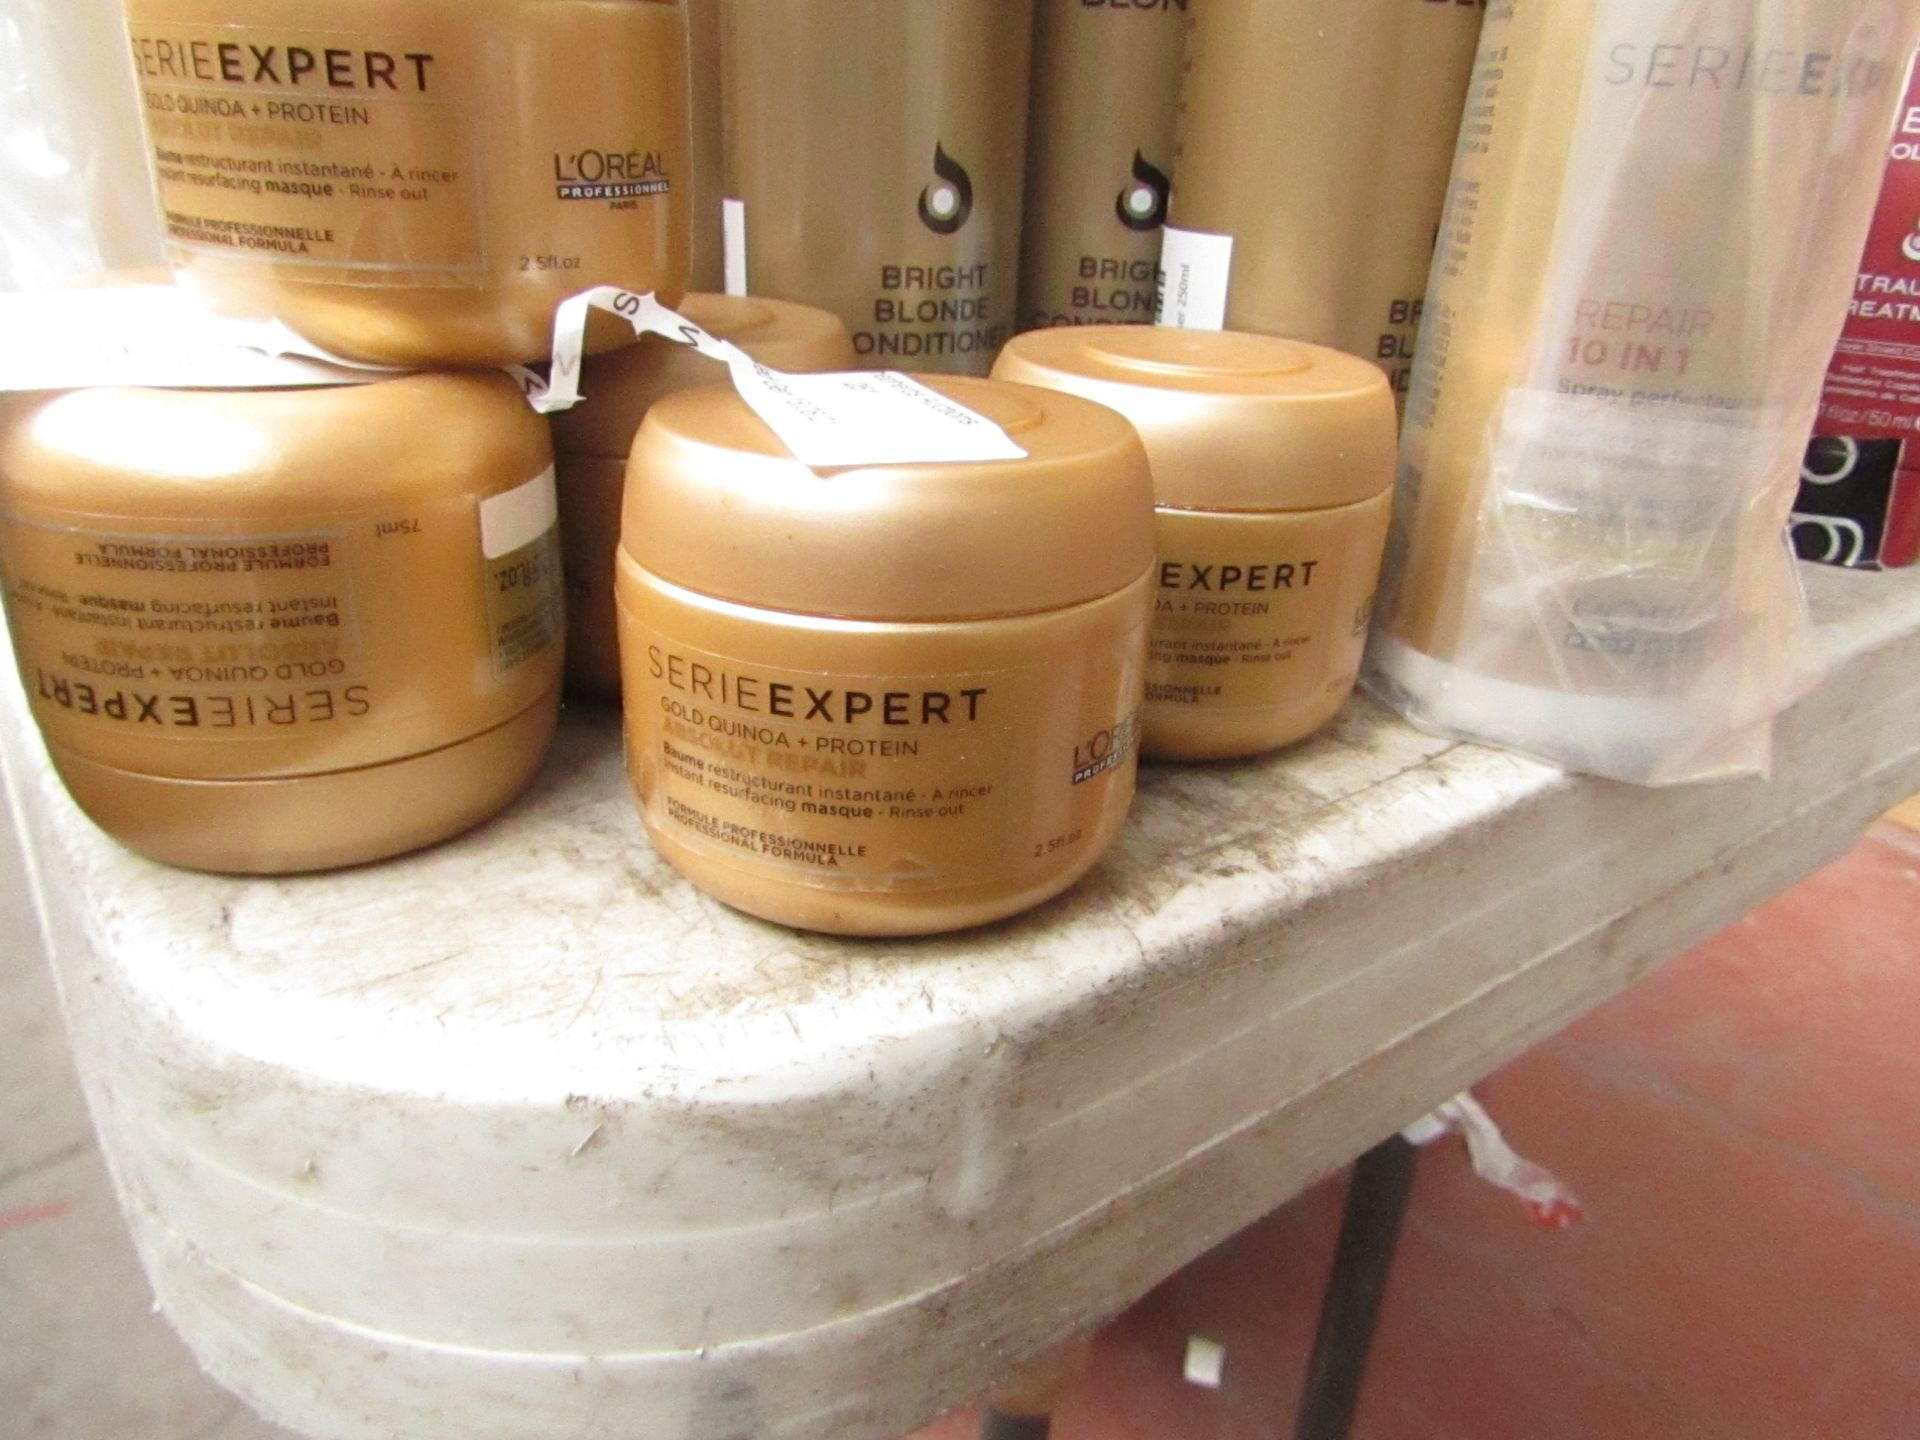 L'Oréal Professionnel - Serie Expert Absolut Repair Gold 10-in-1 - 190ml - New & Sealed. RRP £10.00